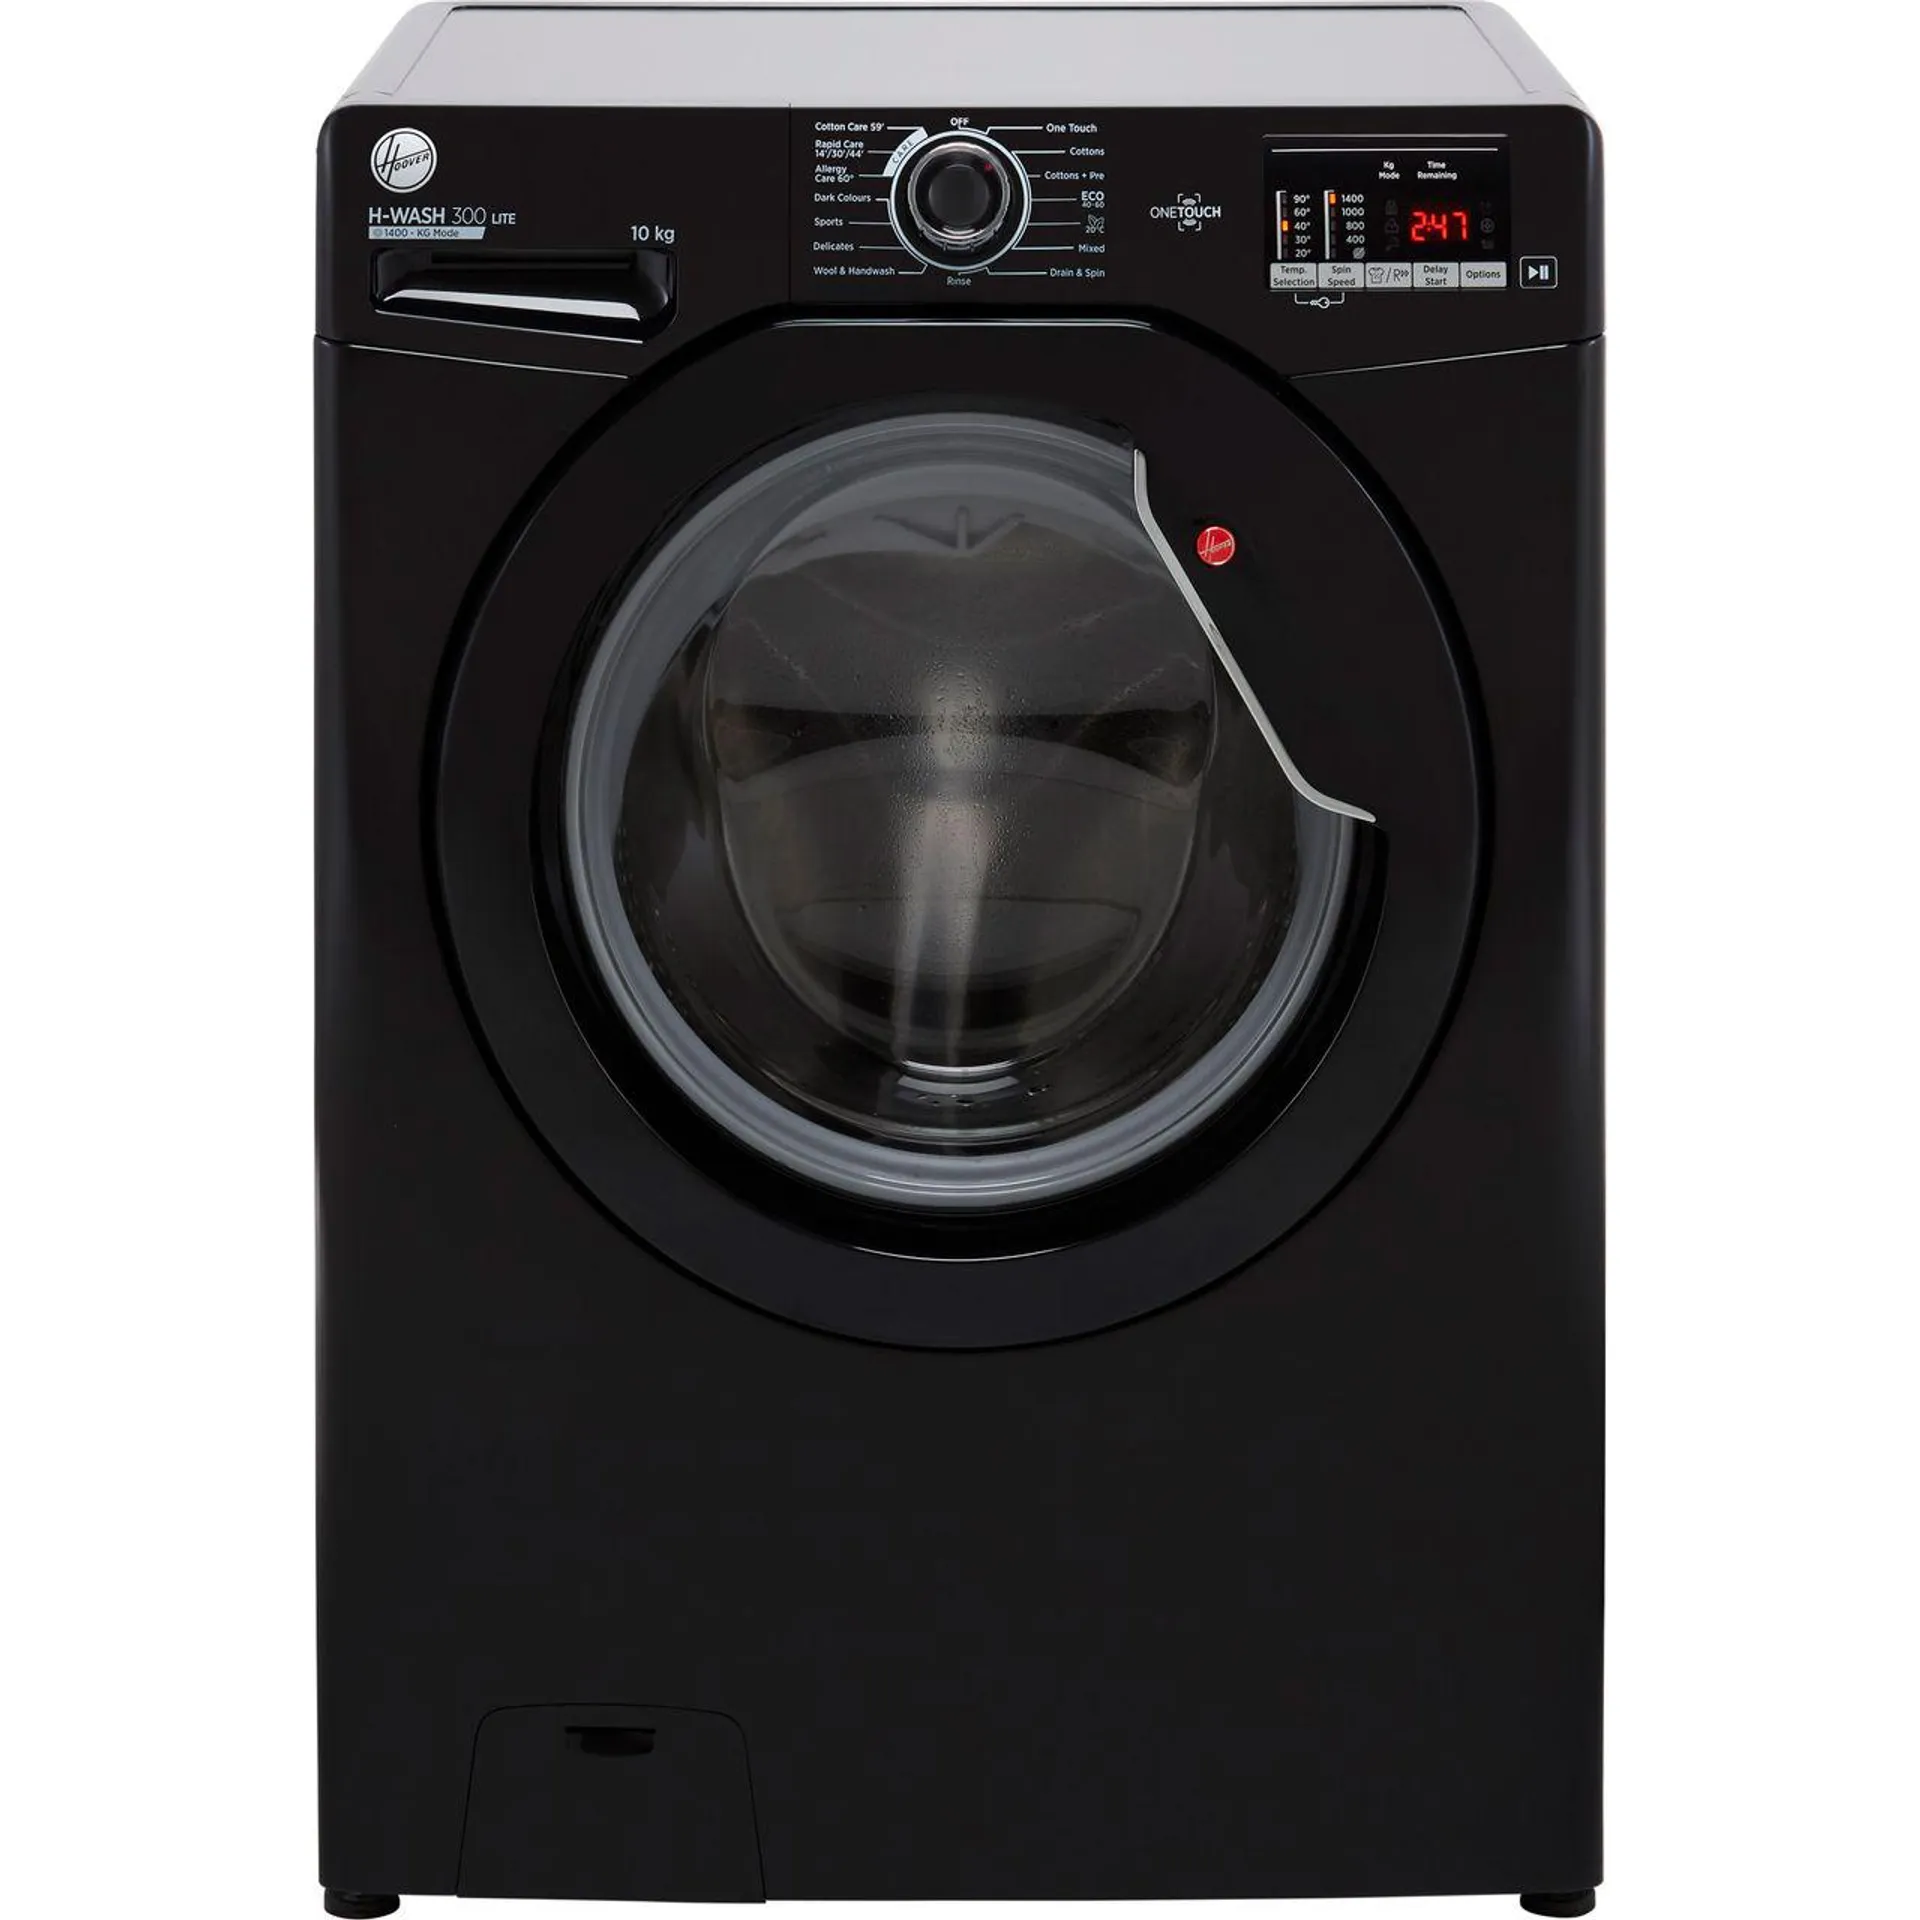 Hoover H-WASH 300 H3W4102DBBE 10kg Washing Machine with 1400 rpm - Black - E Rated